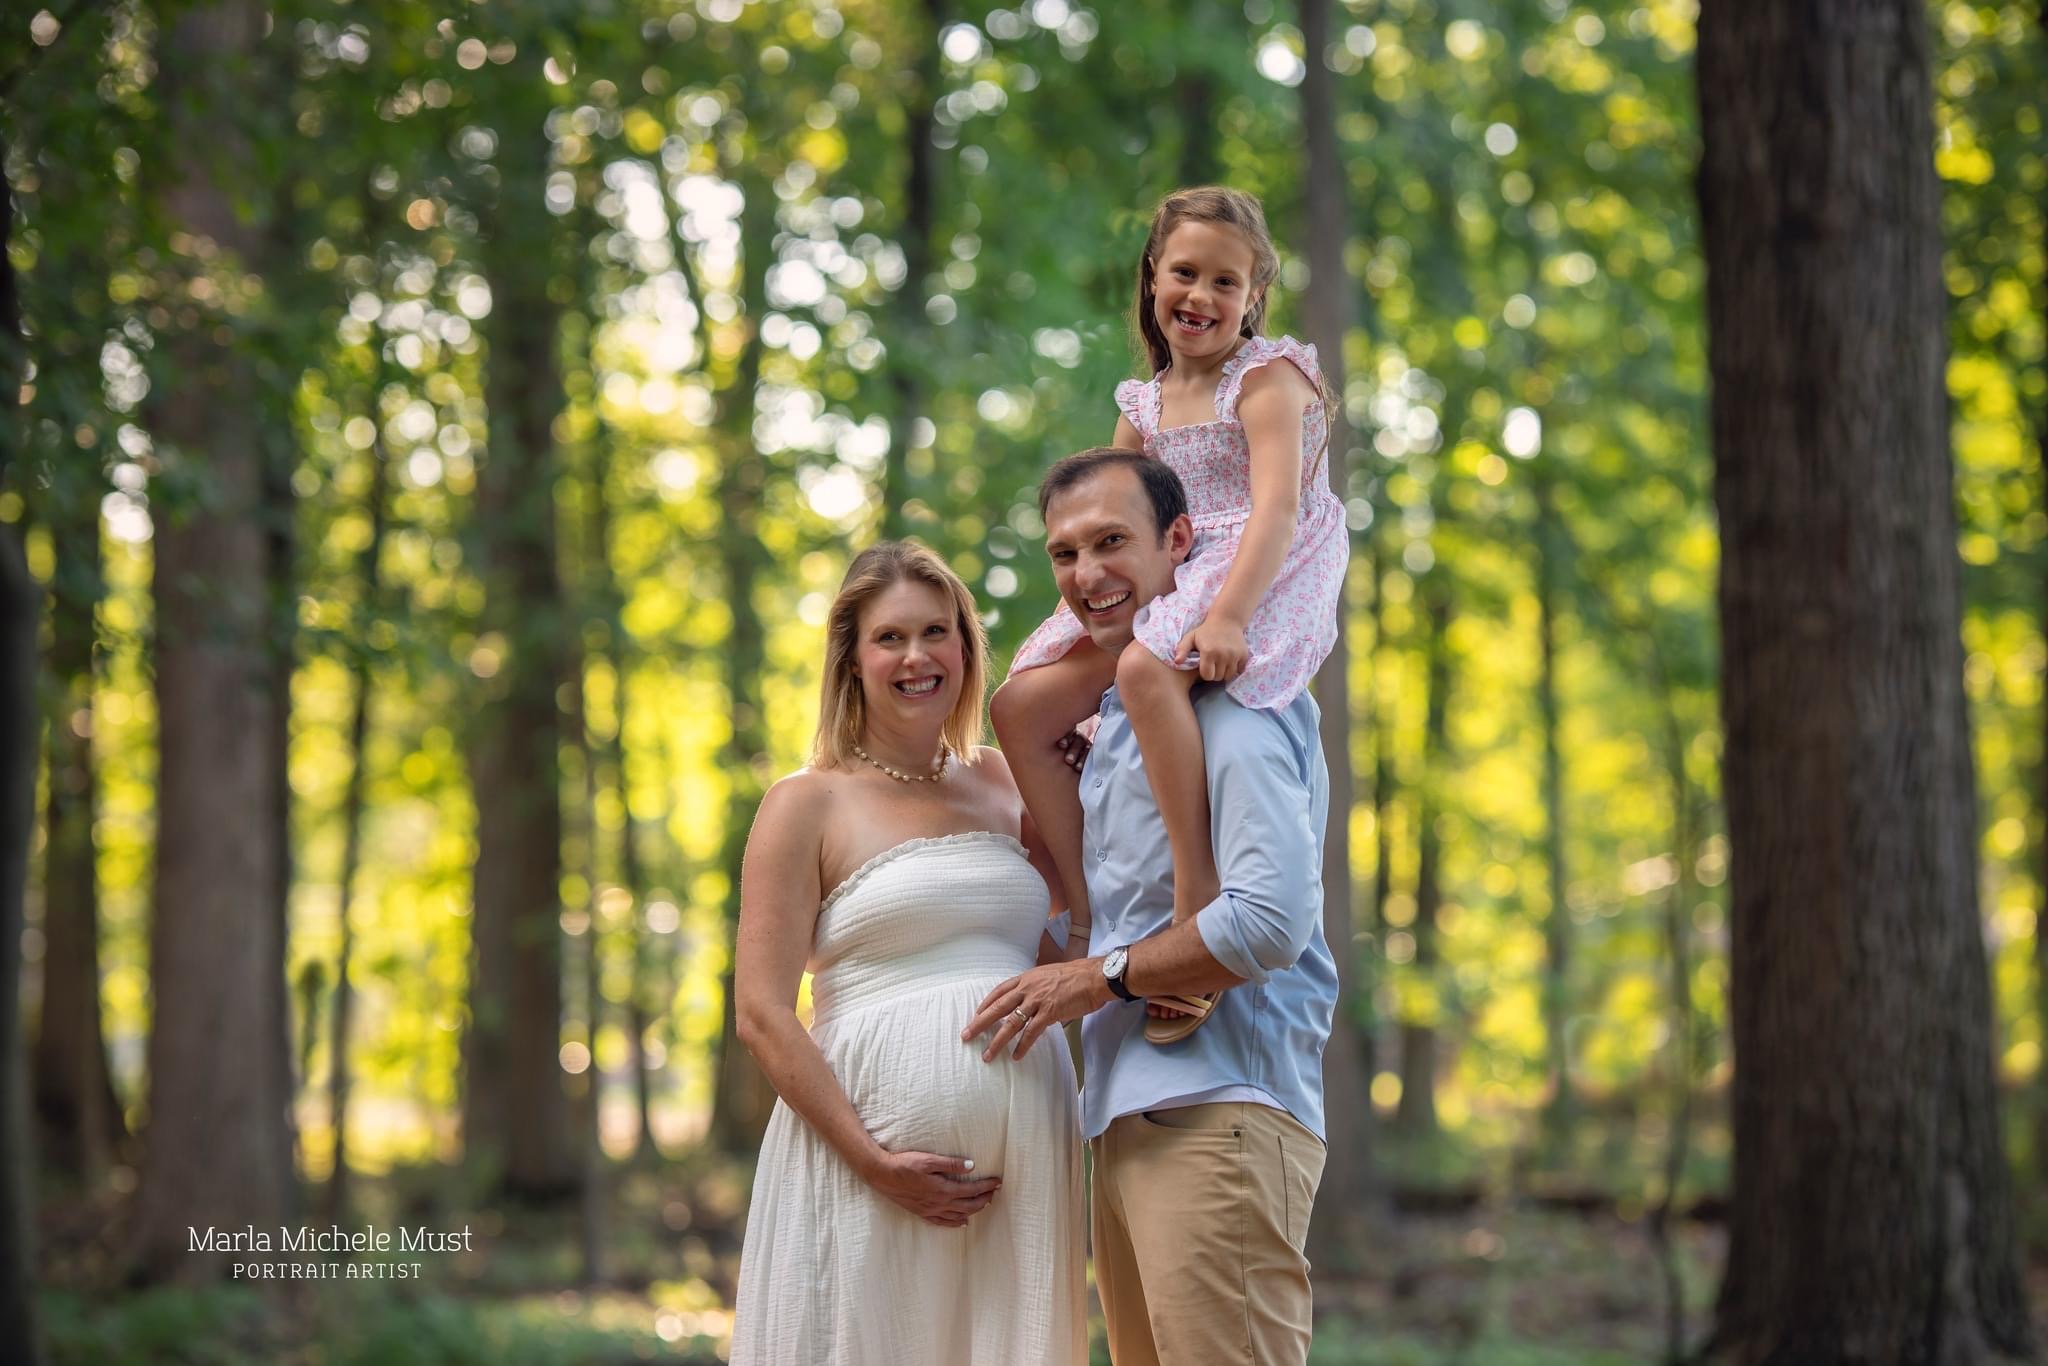 During maternity photoshoot, an expecting mother stands in a Michigan forest with her partner, their daughter is sitting on his shoulders.